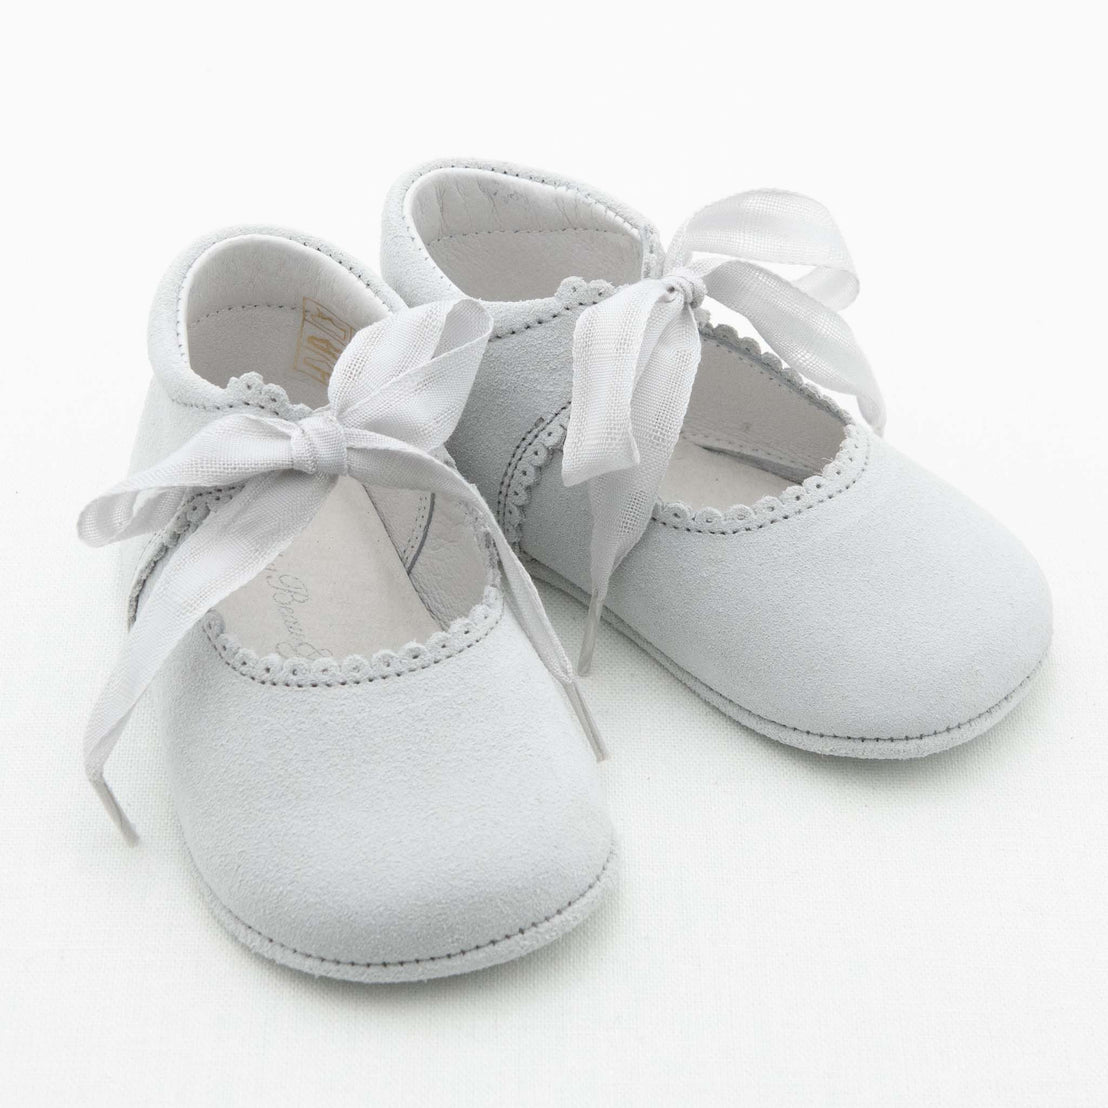 A pair of Thea Suede Tie Mary Janes in pale grey with white ribbon bows. These baby shoes, reminiscent of Baby Beau & Belle creations, feature a soft texture and scalloped edges around the openings. They are placed on a plain white background.